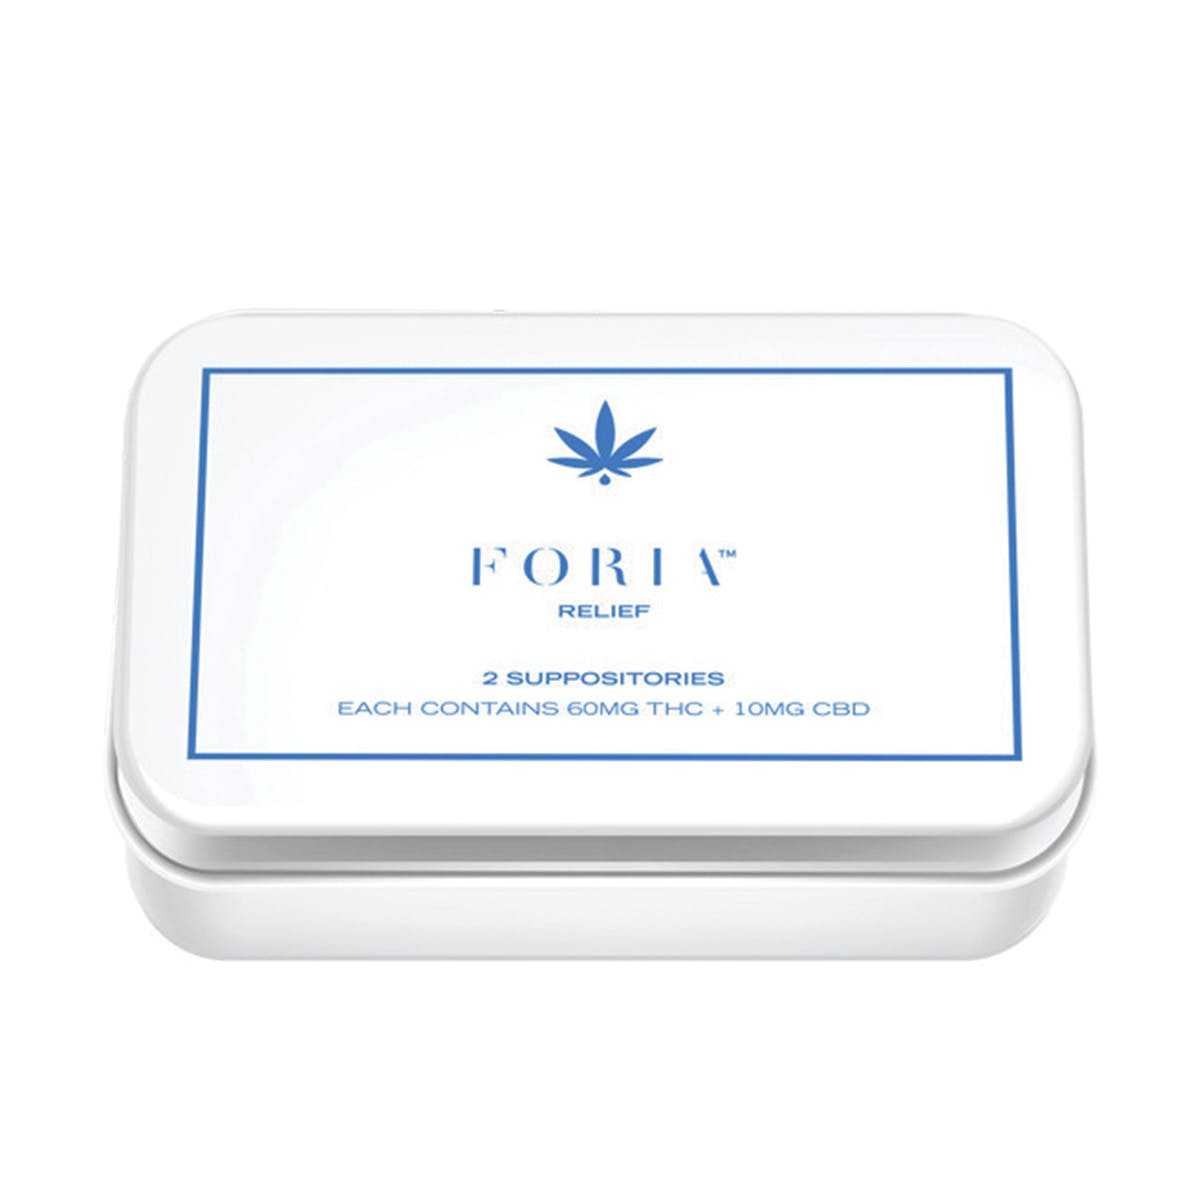 marijuana-dispensaries-kind-pain-management-medical-only-in-lakewood-foria-relief-2-pack-suppositories